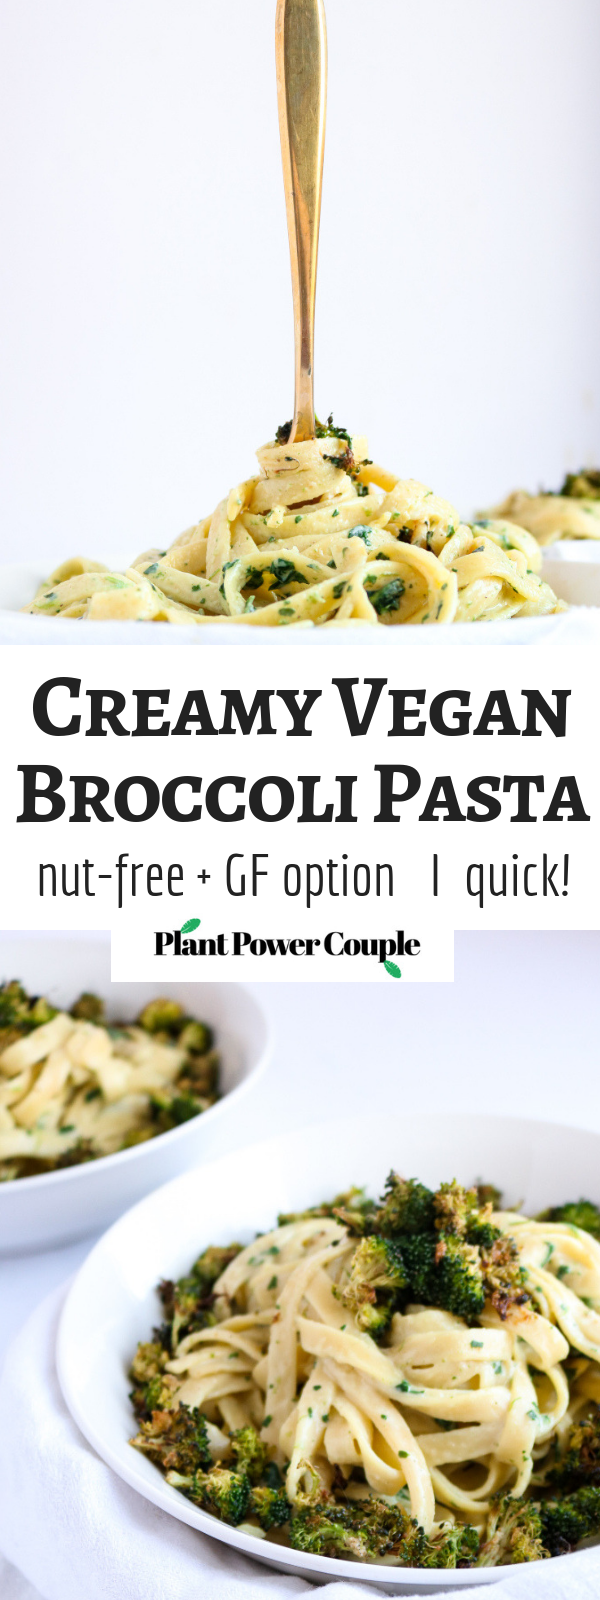 Make this easy vegan creamy broccoli pasta for dinner tonight! It's healthy, comforting, and requires ZERO cashew-soaking time. Blend, heat, and pour over pasta! #vegan #pasta #broccoli #veganrecipe // plantpowercouple.com